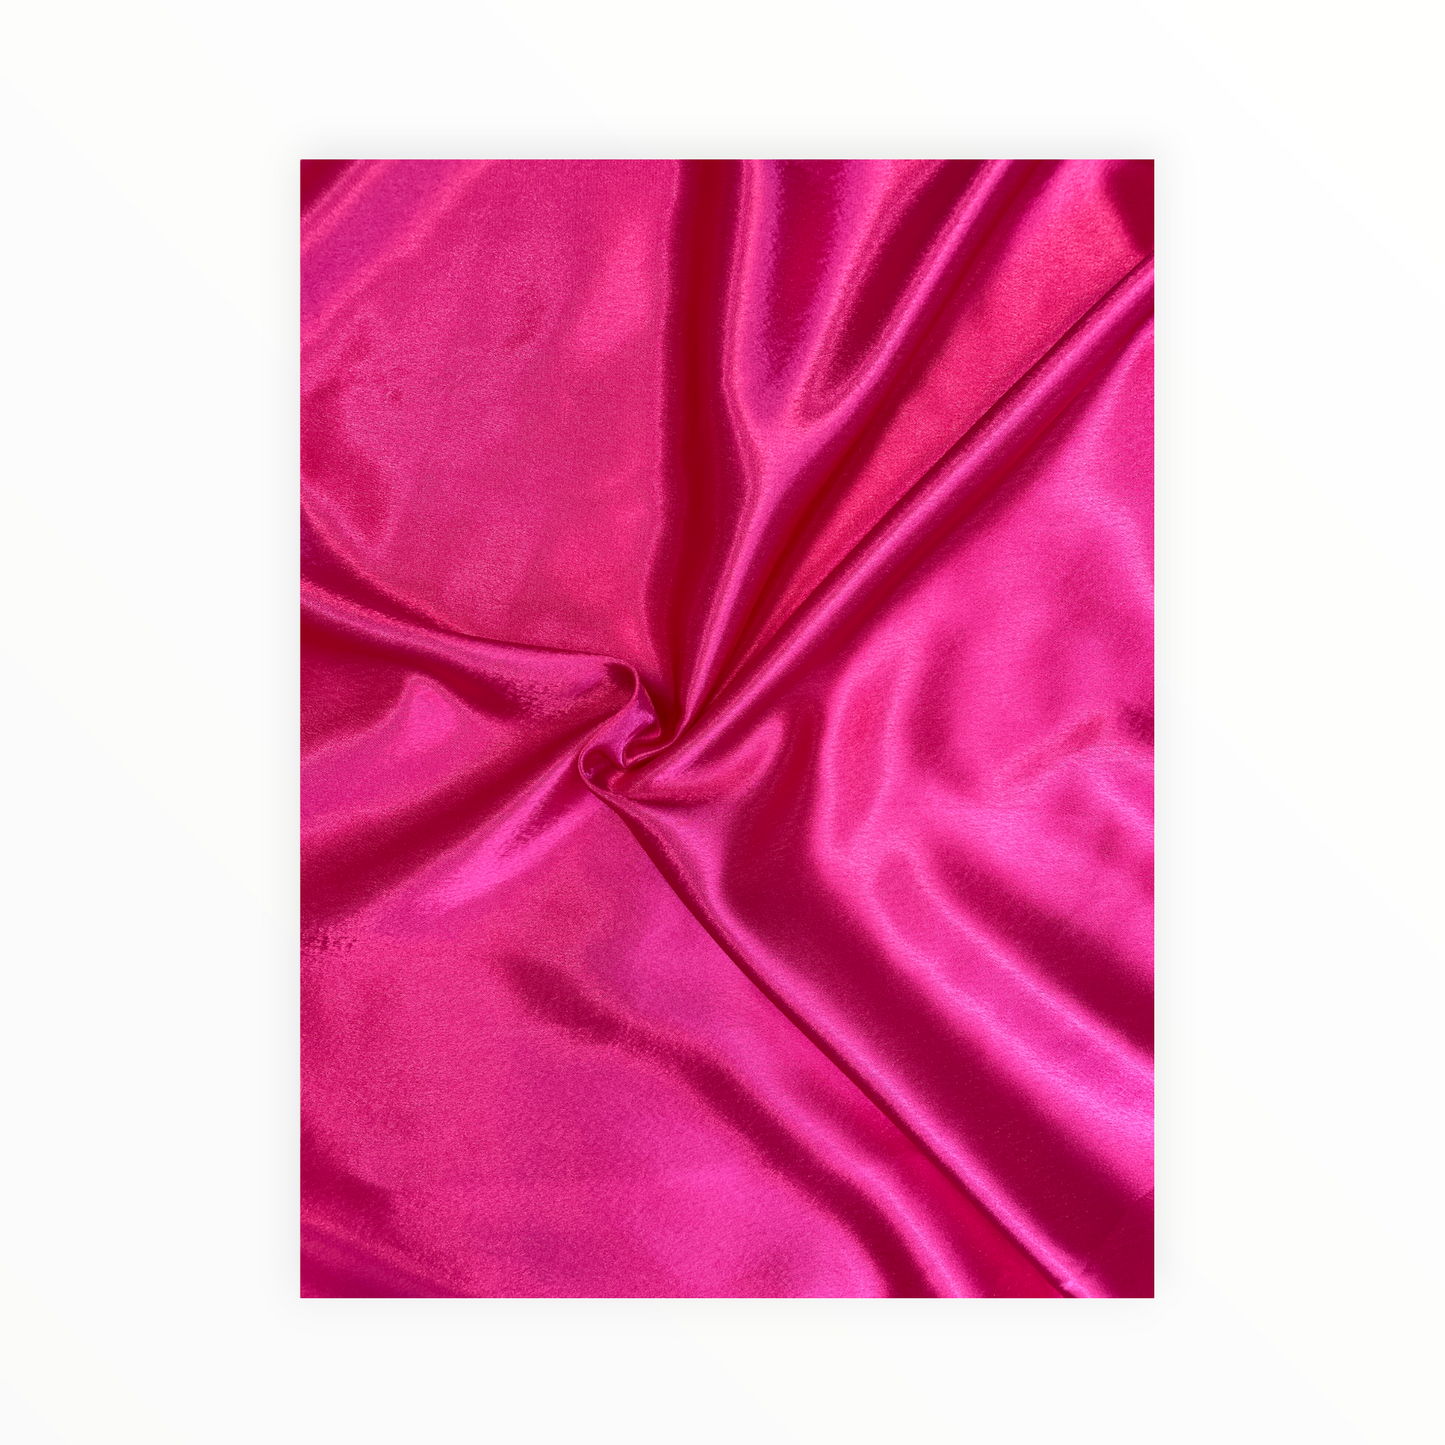 Cherry Red Silky Smooth Crepe Satin